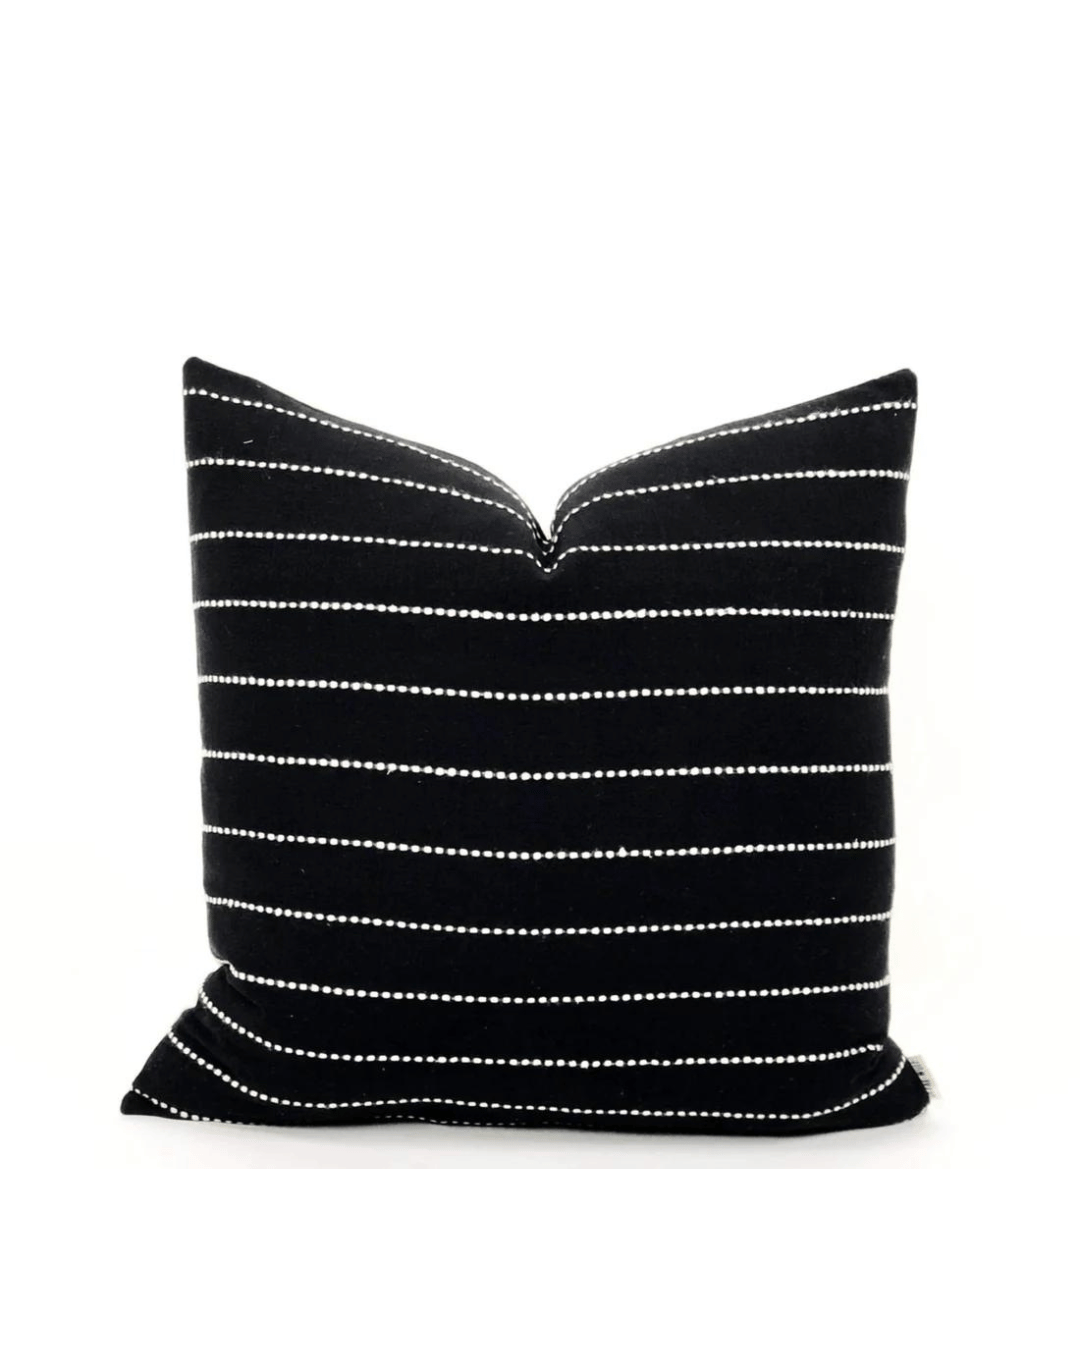 Handwoven Black and White Pillow 24x24